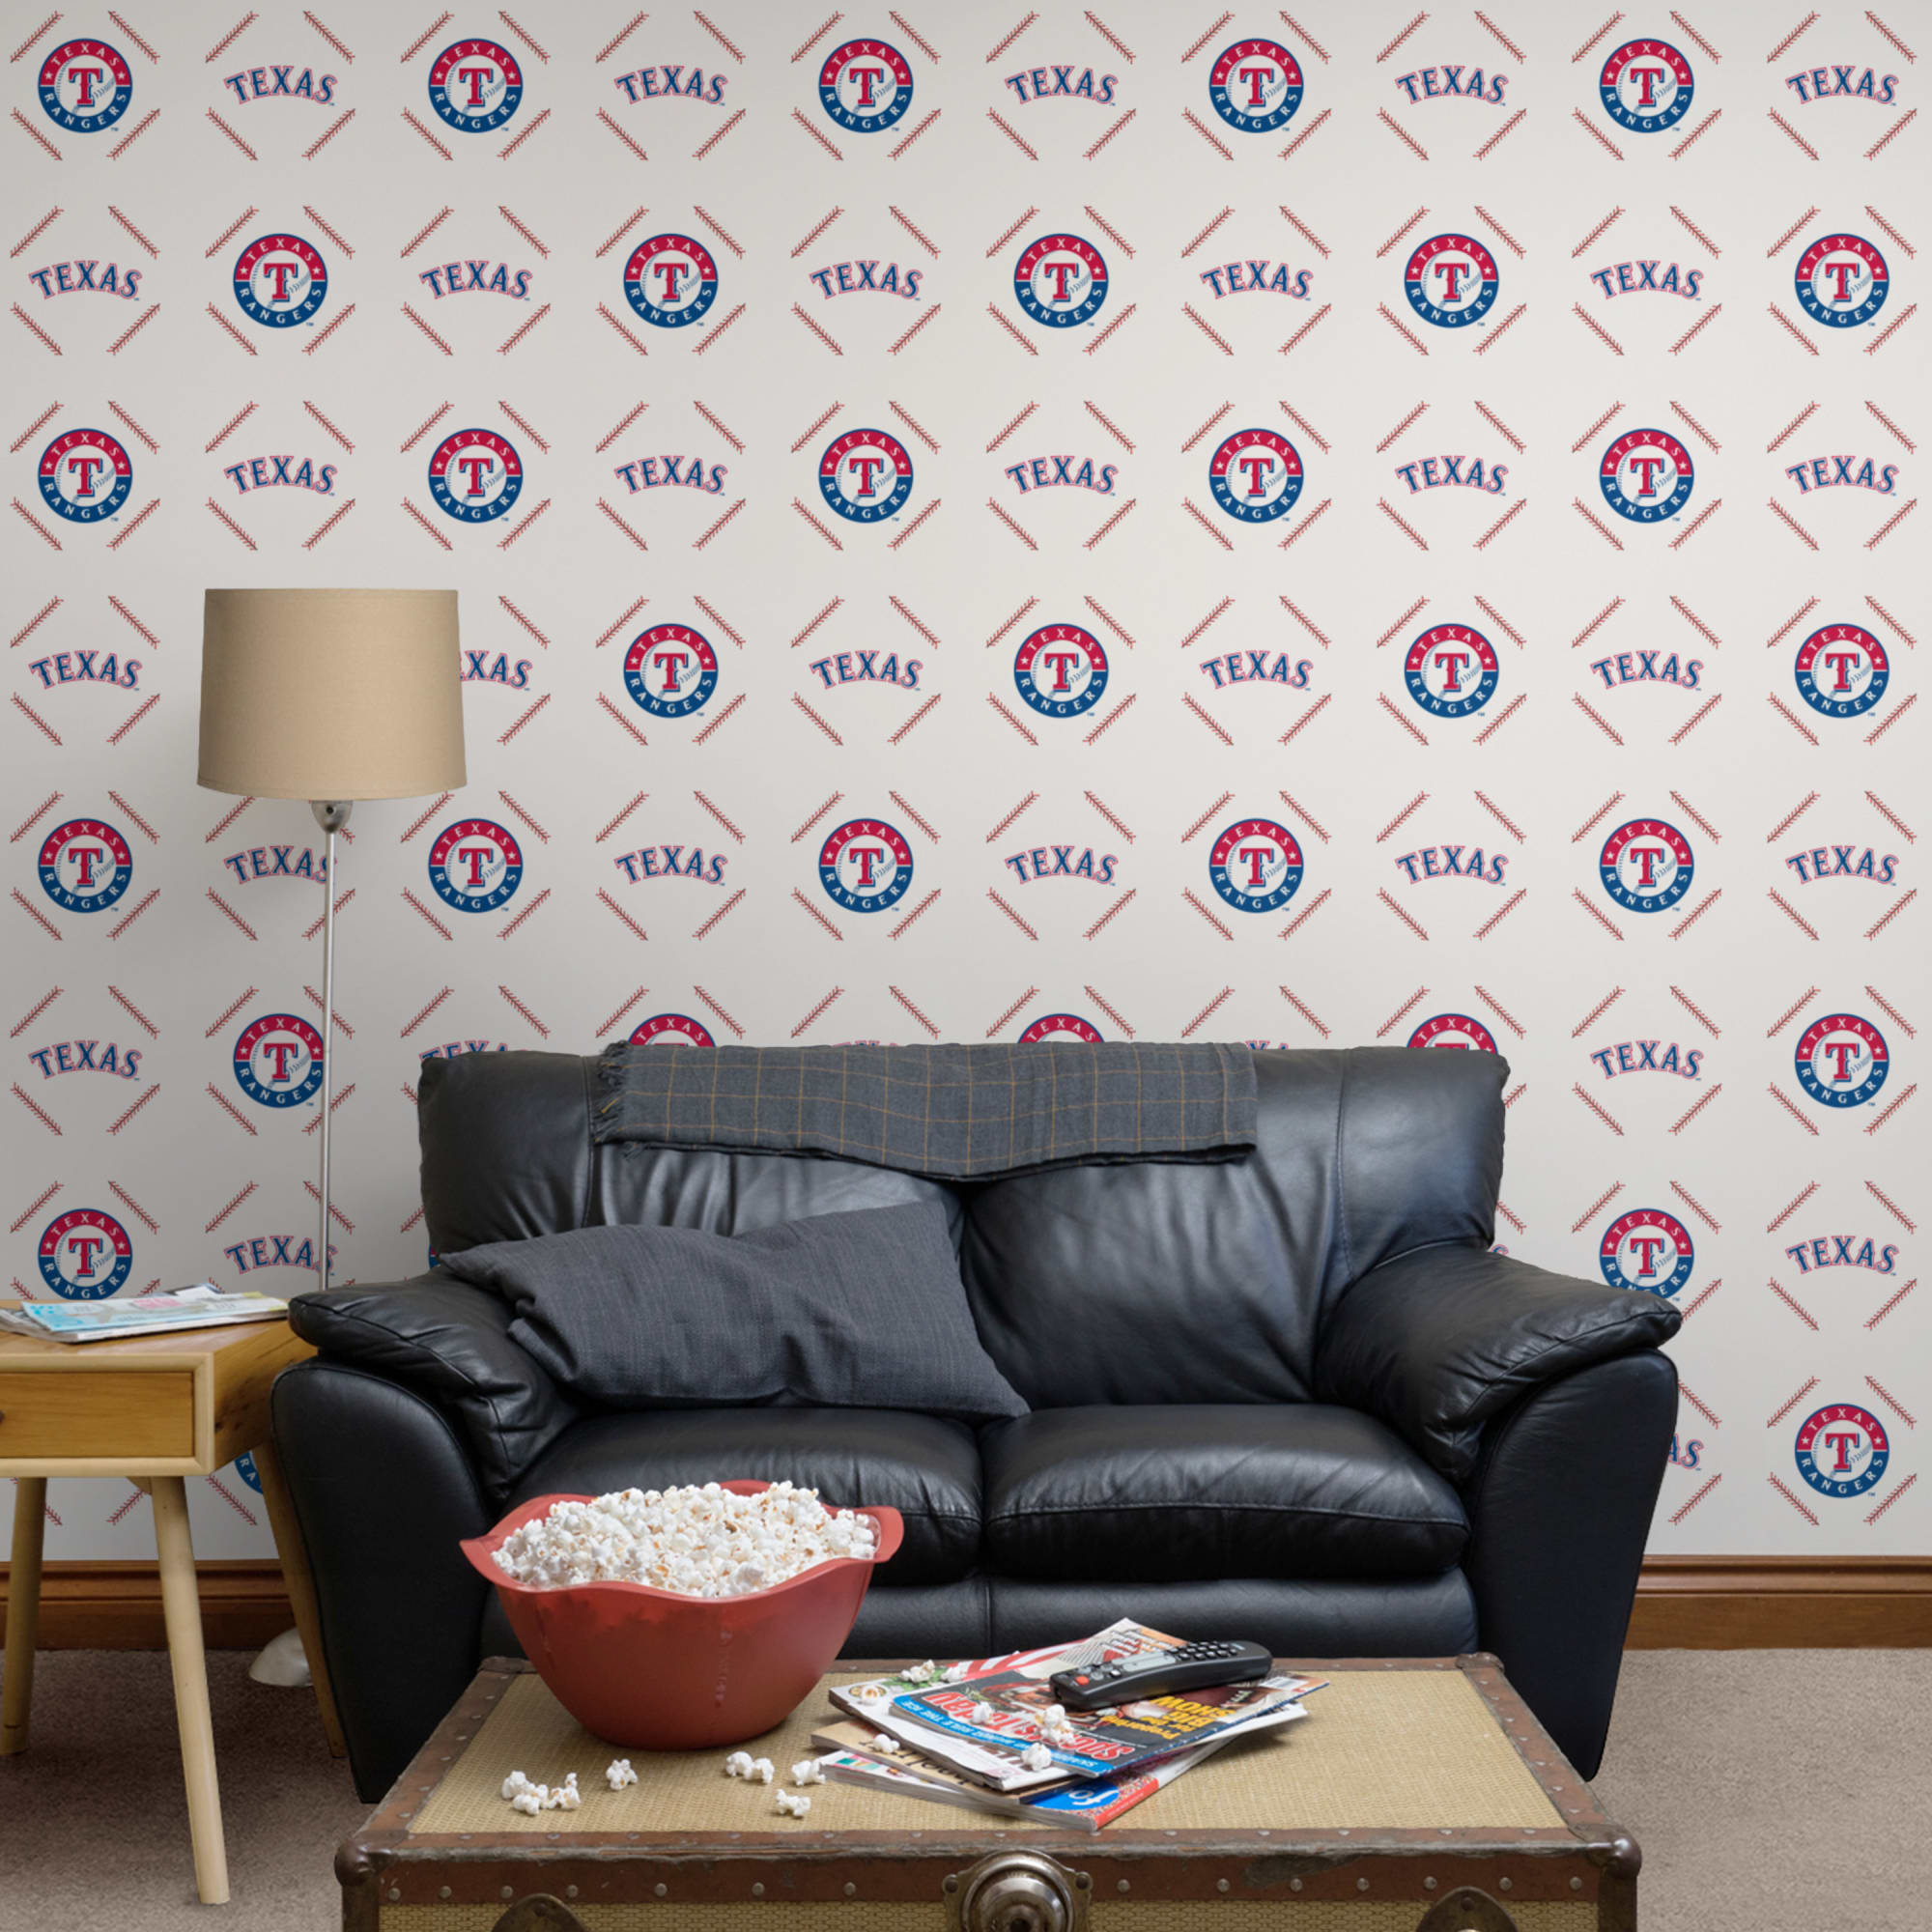 Texas Rangers: Stitch Pattern - Officially Licensed Removable Wallpaper 12" x 12" Sample by Fathead